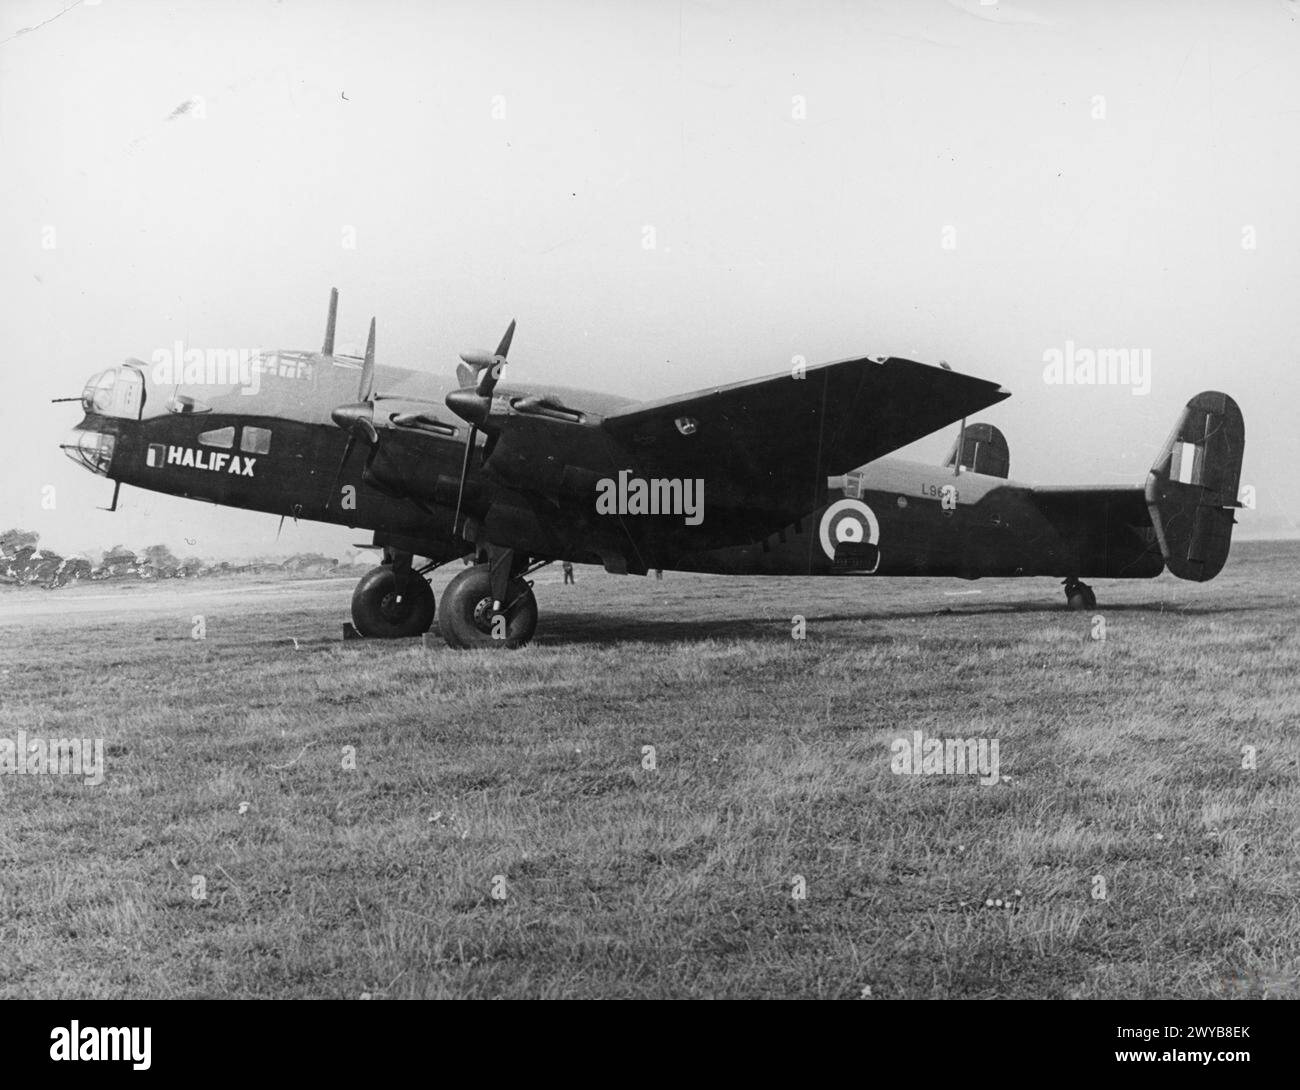 RAF BOMBER COMMAND - Handley Page Halifax Mk I L9608 at Radlett, Hertfordshire, following an official naming ceremony at the Handley Page factory by Lady Halifax, 12 September 1941. The aircraft subsequently served with No. 35 Squadron RAF and No. 1652 Heavy Conversion Unit before being written off in November 1942. , Stock Photo